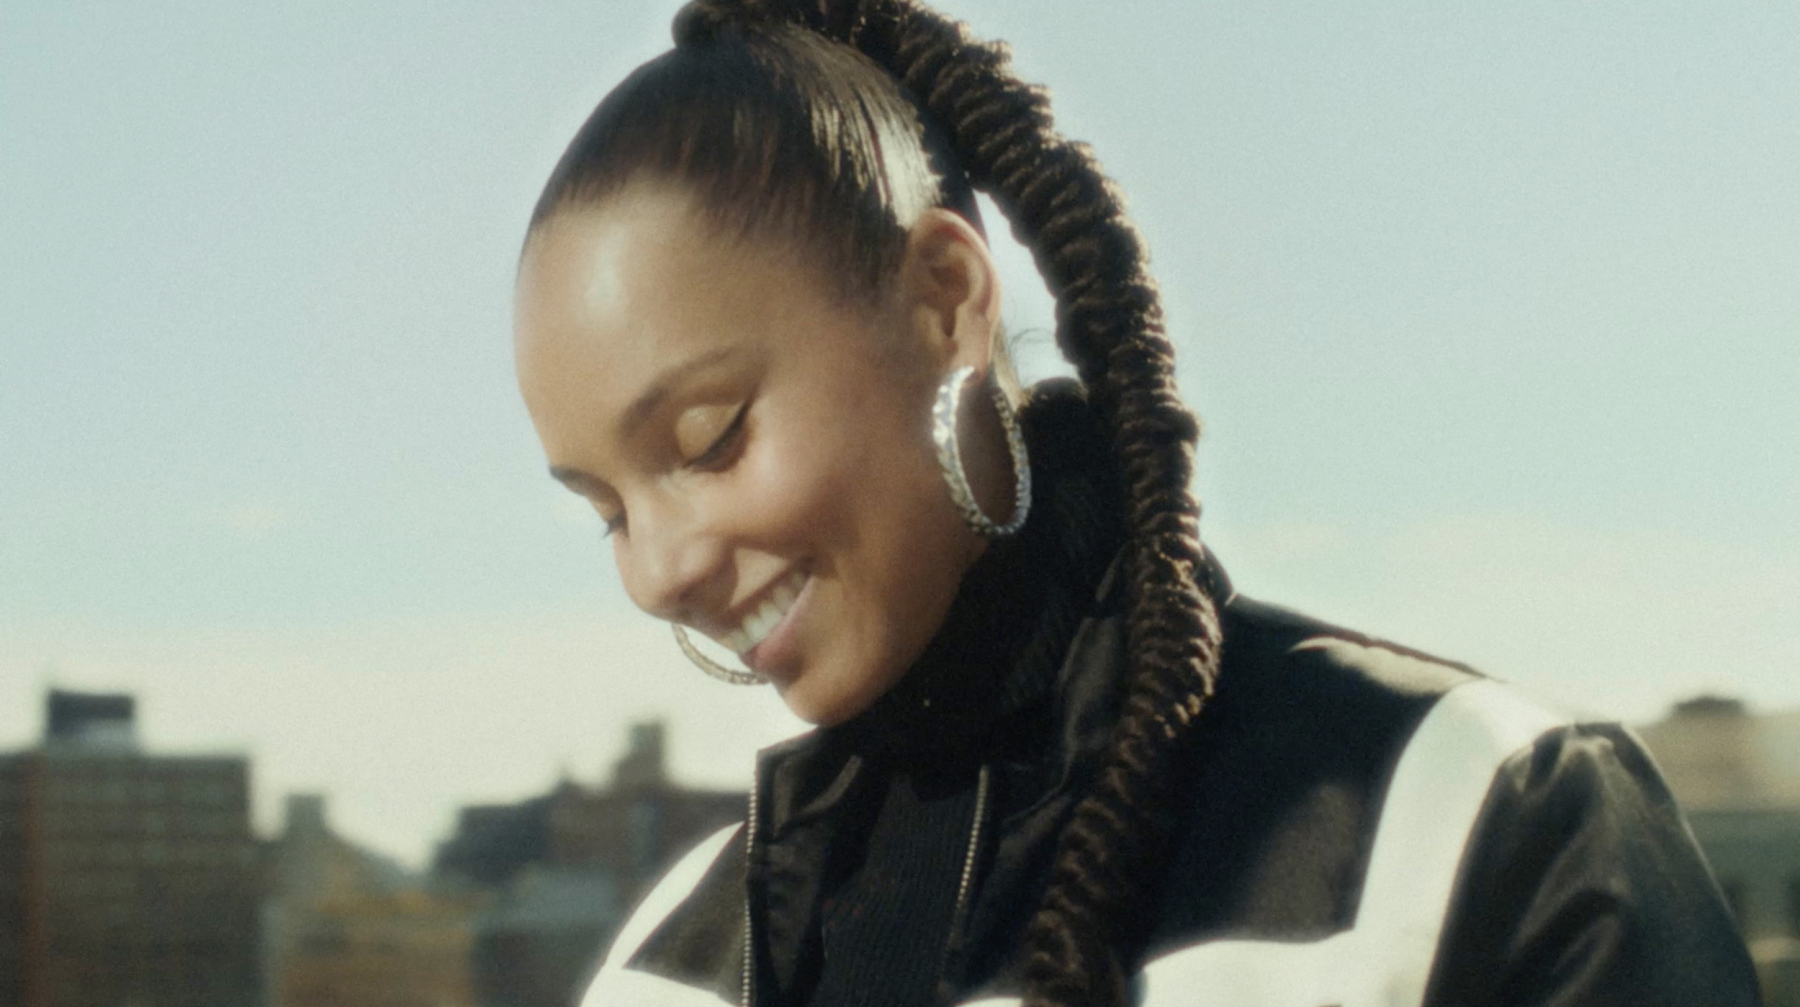 Mercedes-Benz and Alicia Keys empower women to go their own way